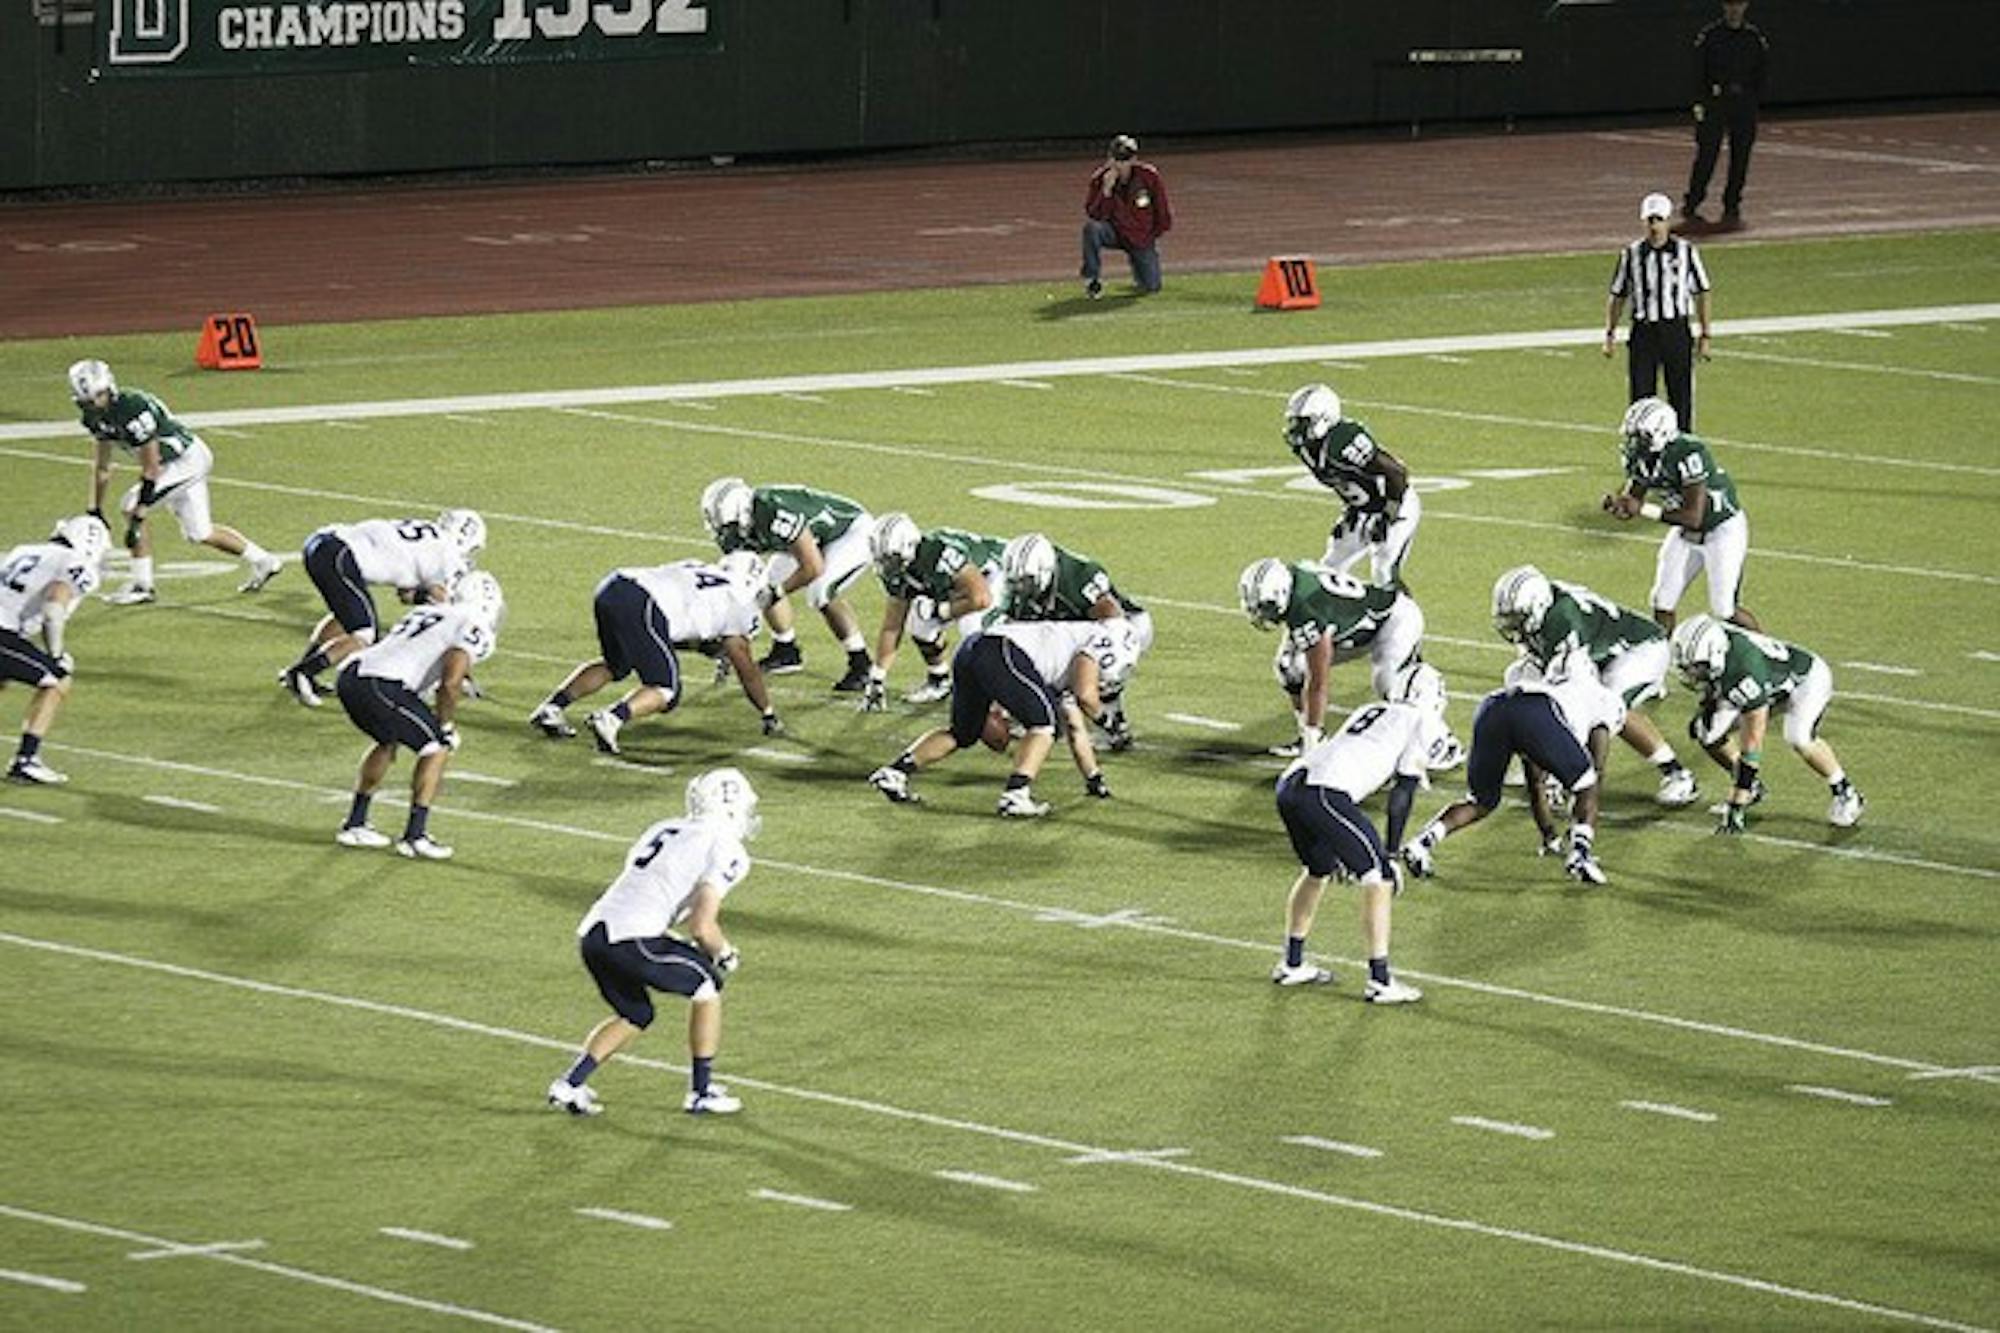 The Dartmouth football team pulled out a last-second 13-10 victory against the College of the Holy Cross on Saturday.